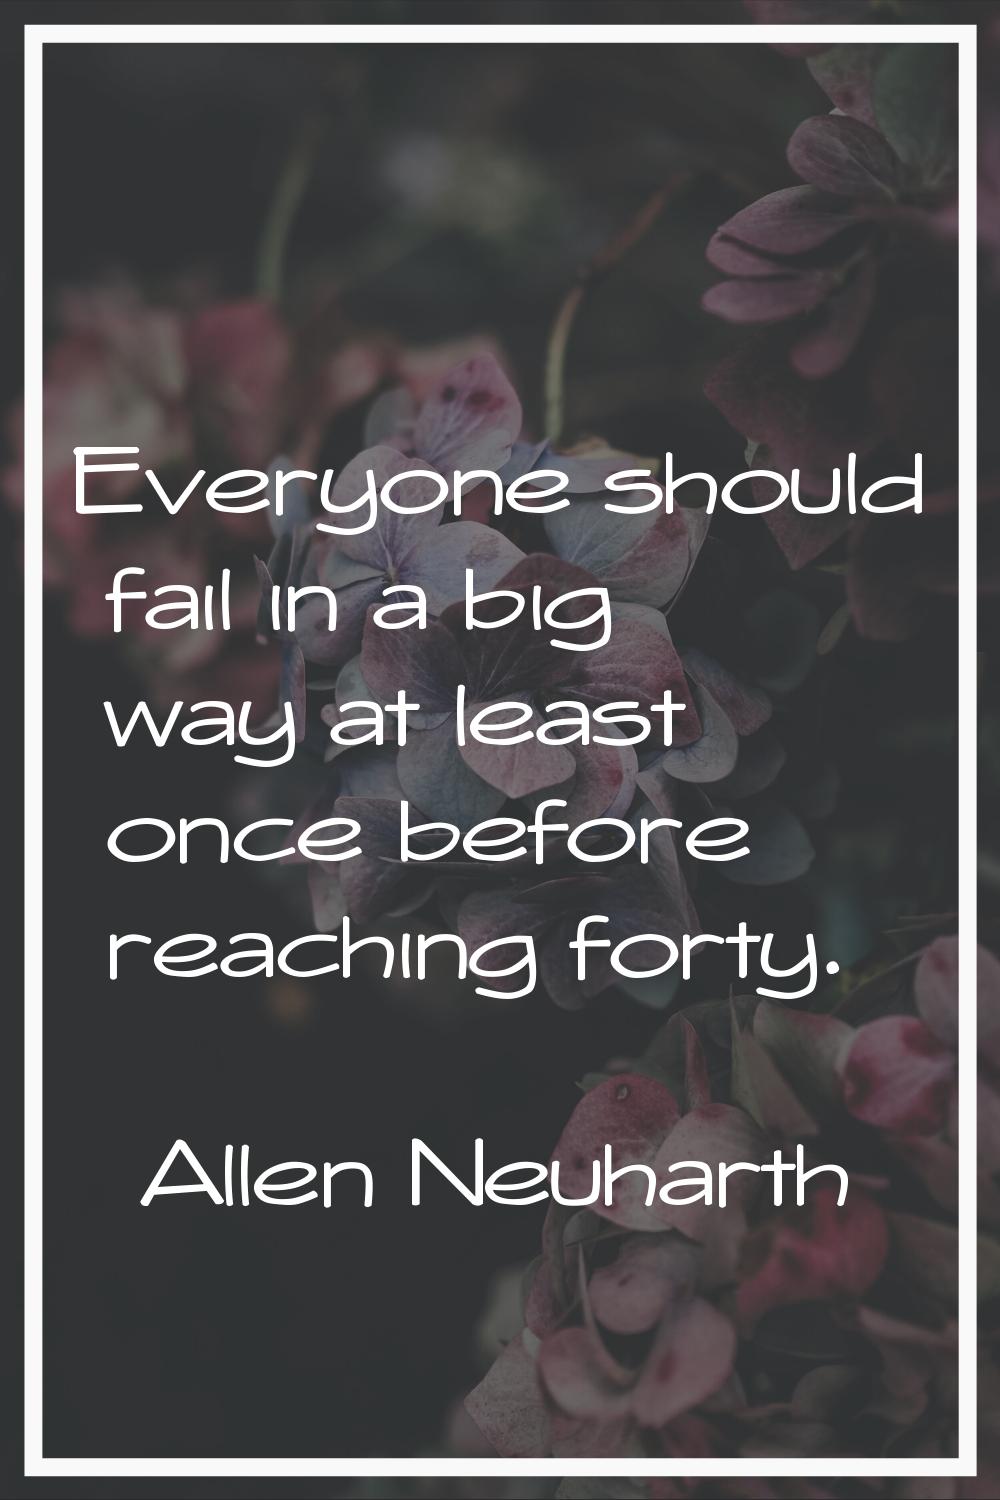 Everyone should fail in a big way at least once before reaching forty.